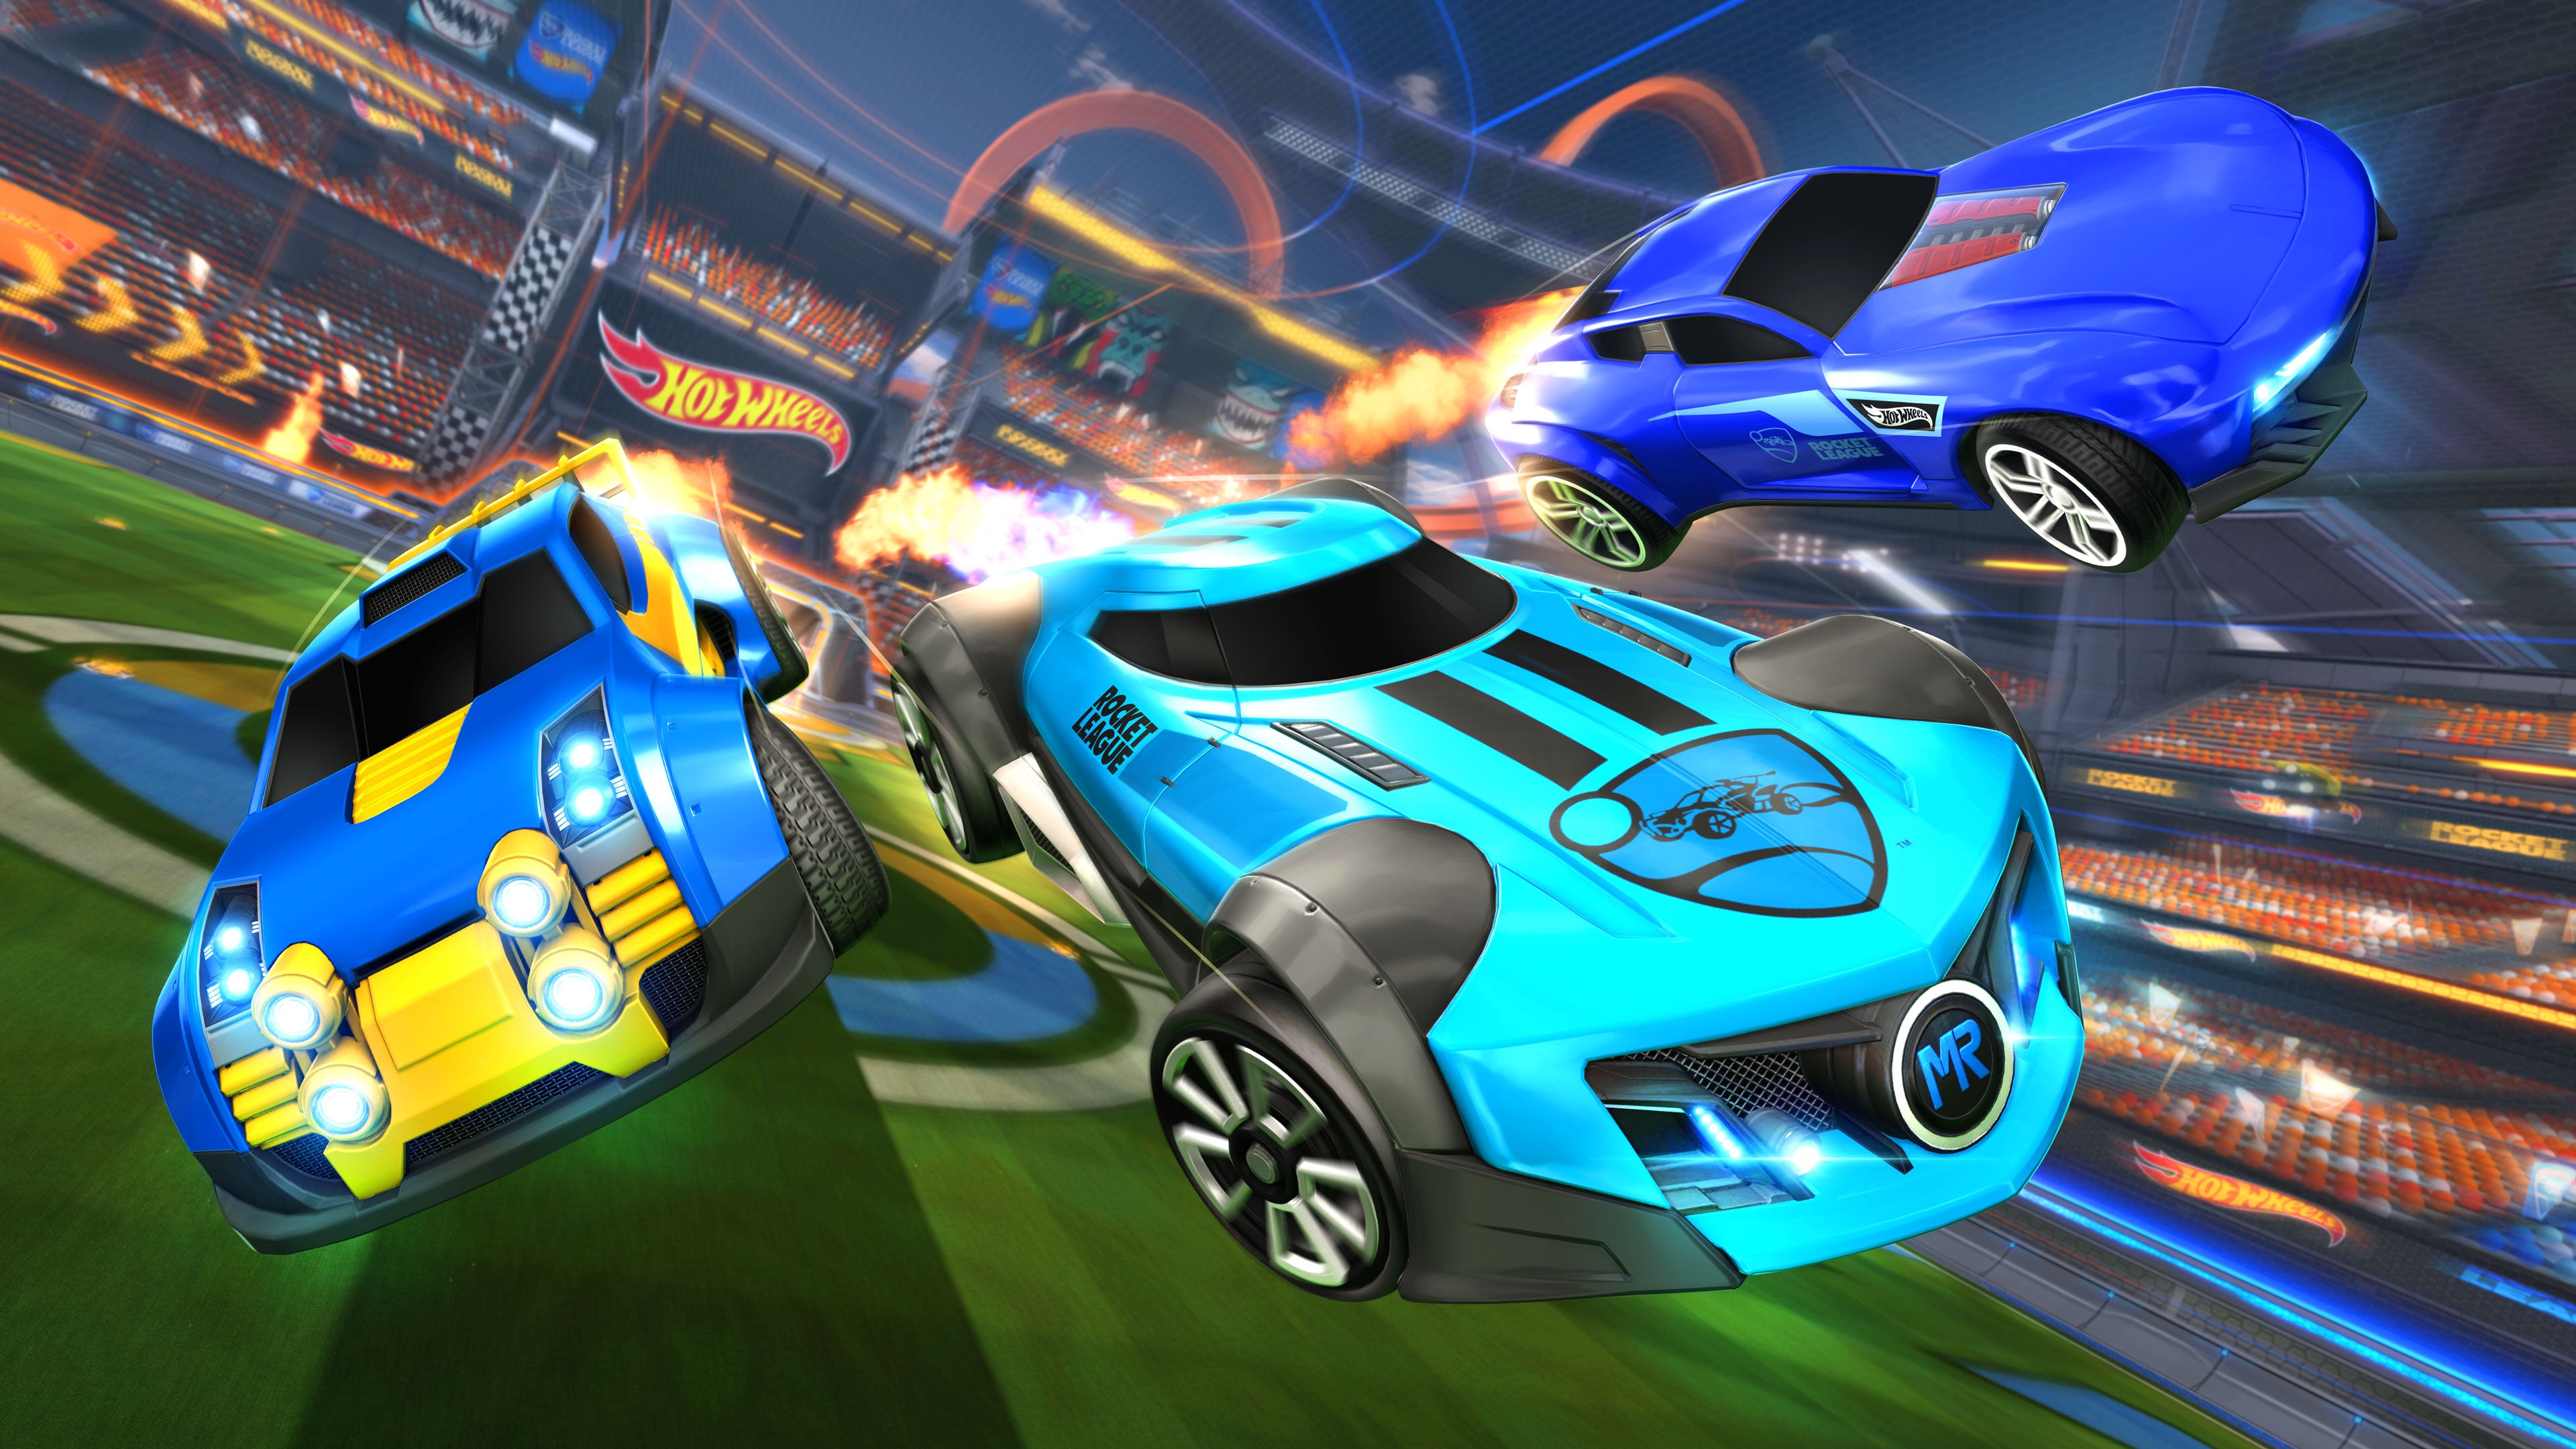 BATTLE WHEELS - Play this Game Online for Free Now!